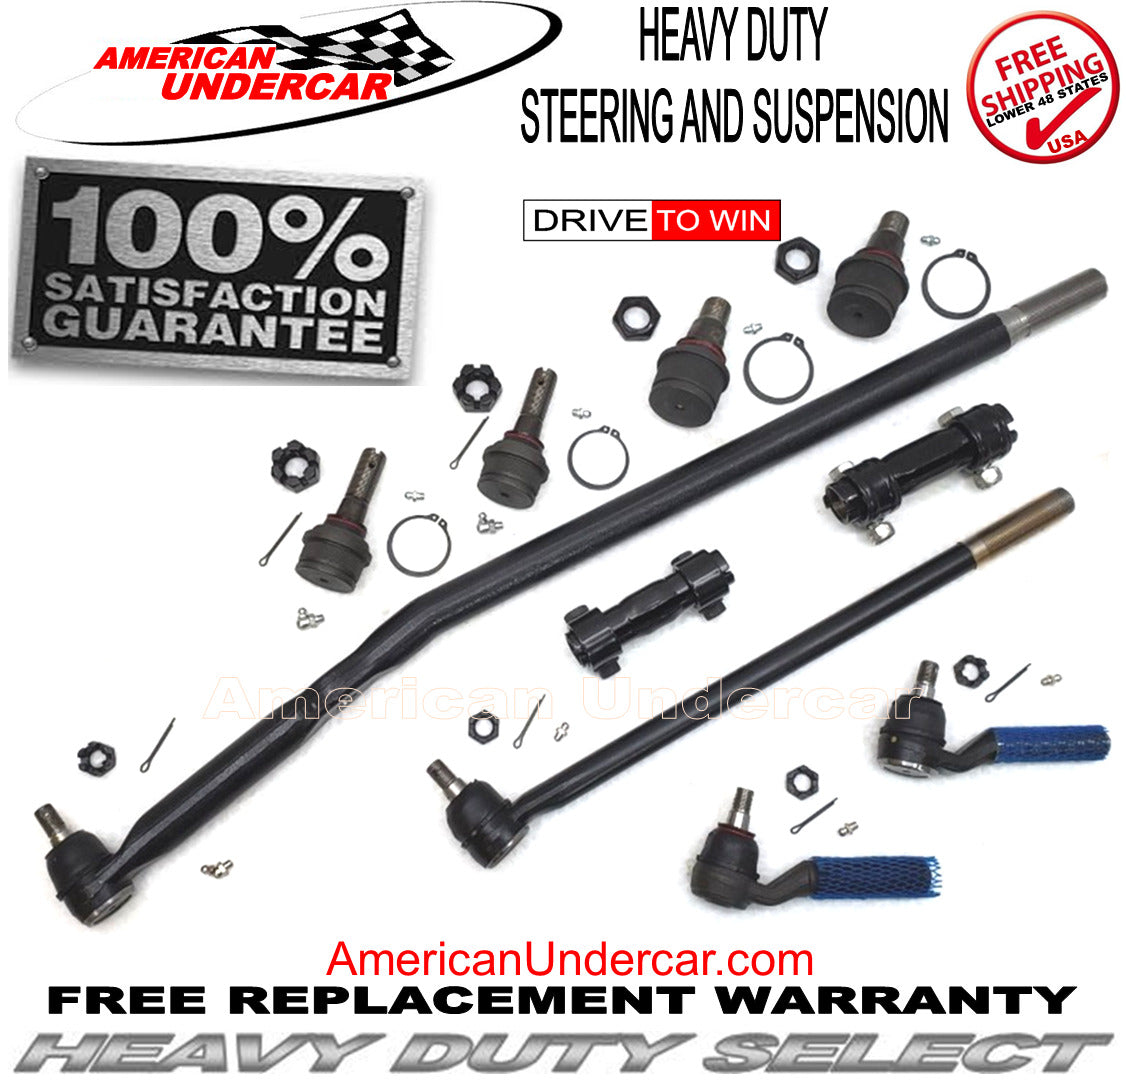 HD Ball Joint Tie Rod Drag Link Sleeve Steering Kit for 1997 Ford F250HD 4x4, 4600lb Axle